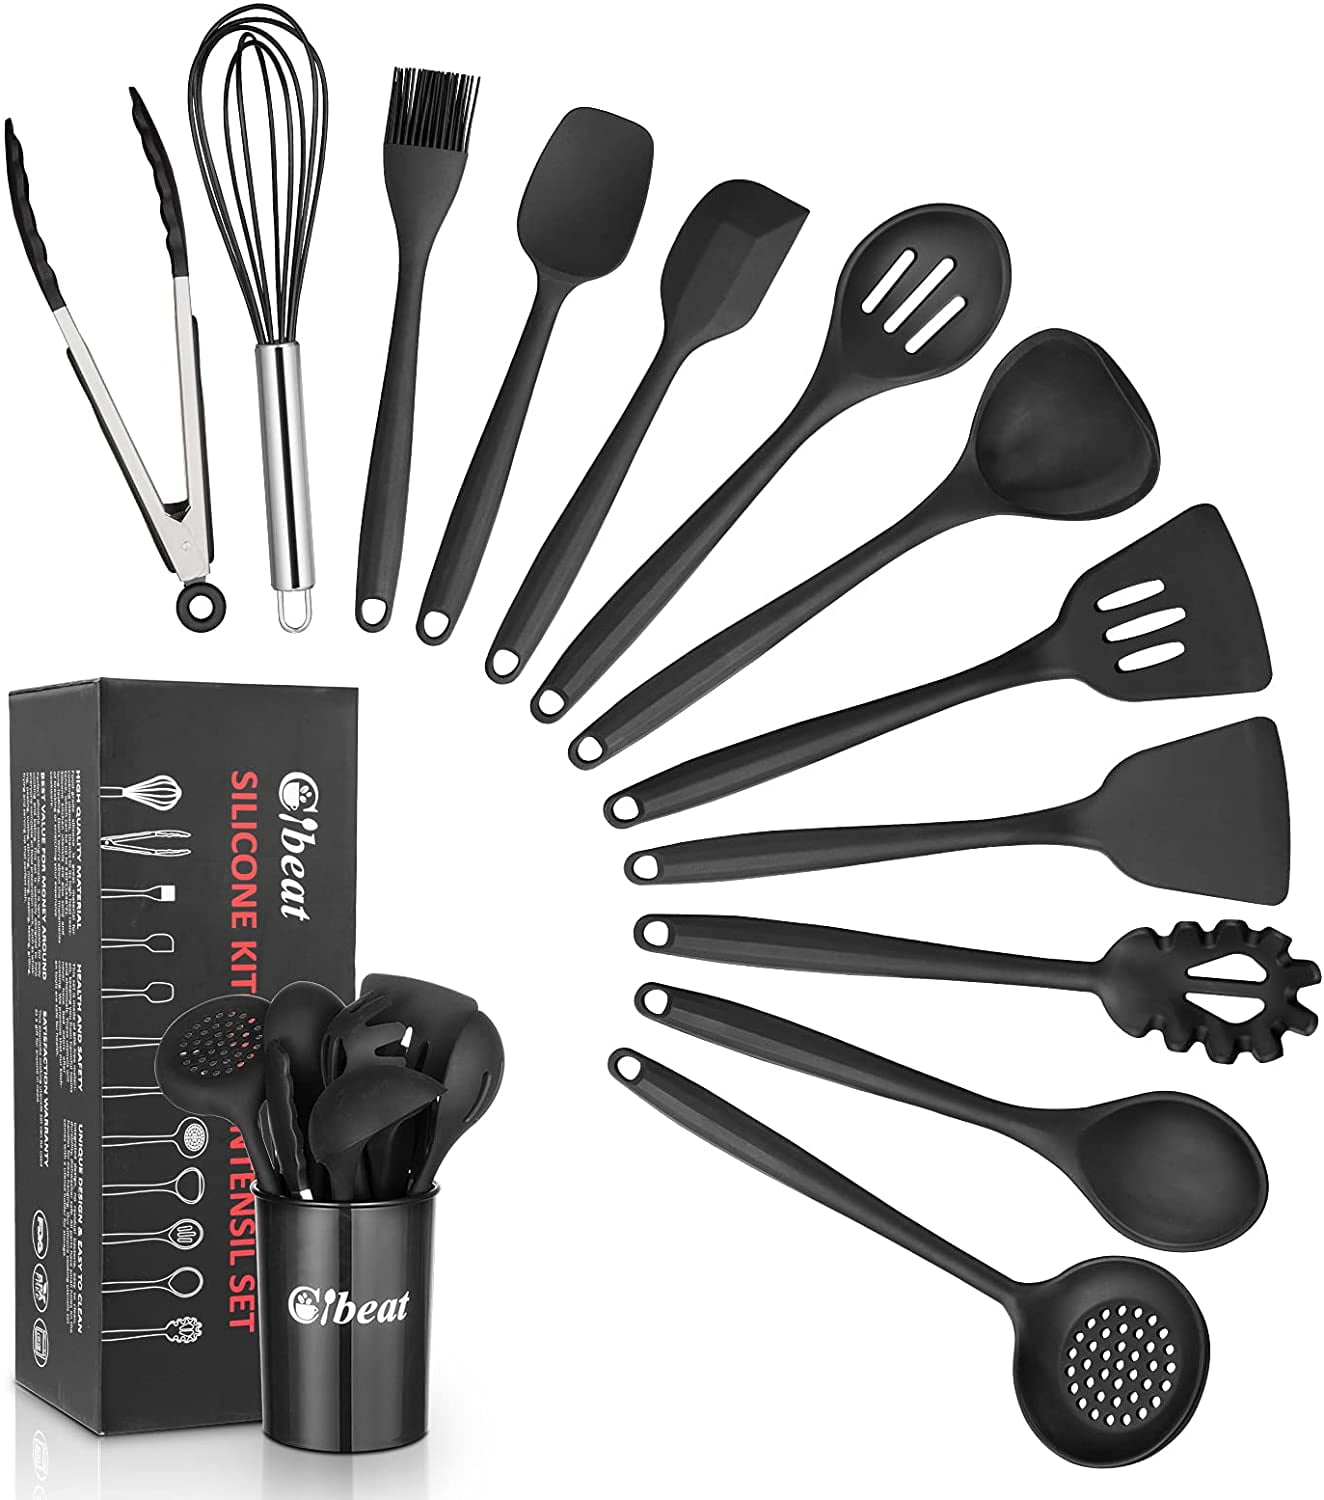 Heat Resistant Non-stick Black Silicone Cooking Utensil Set 13 pcs with Spatula